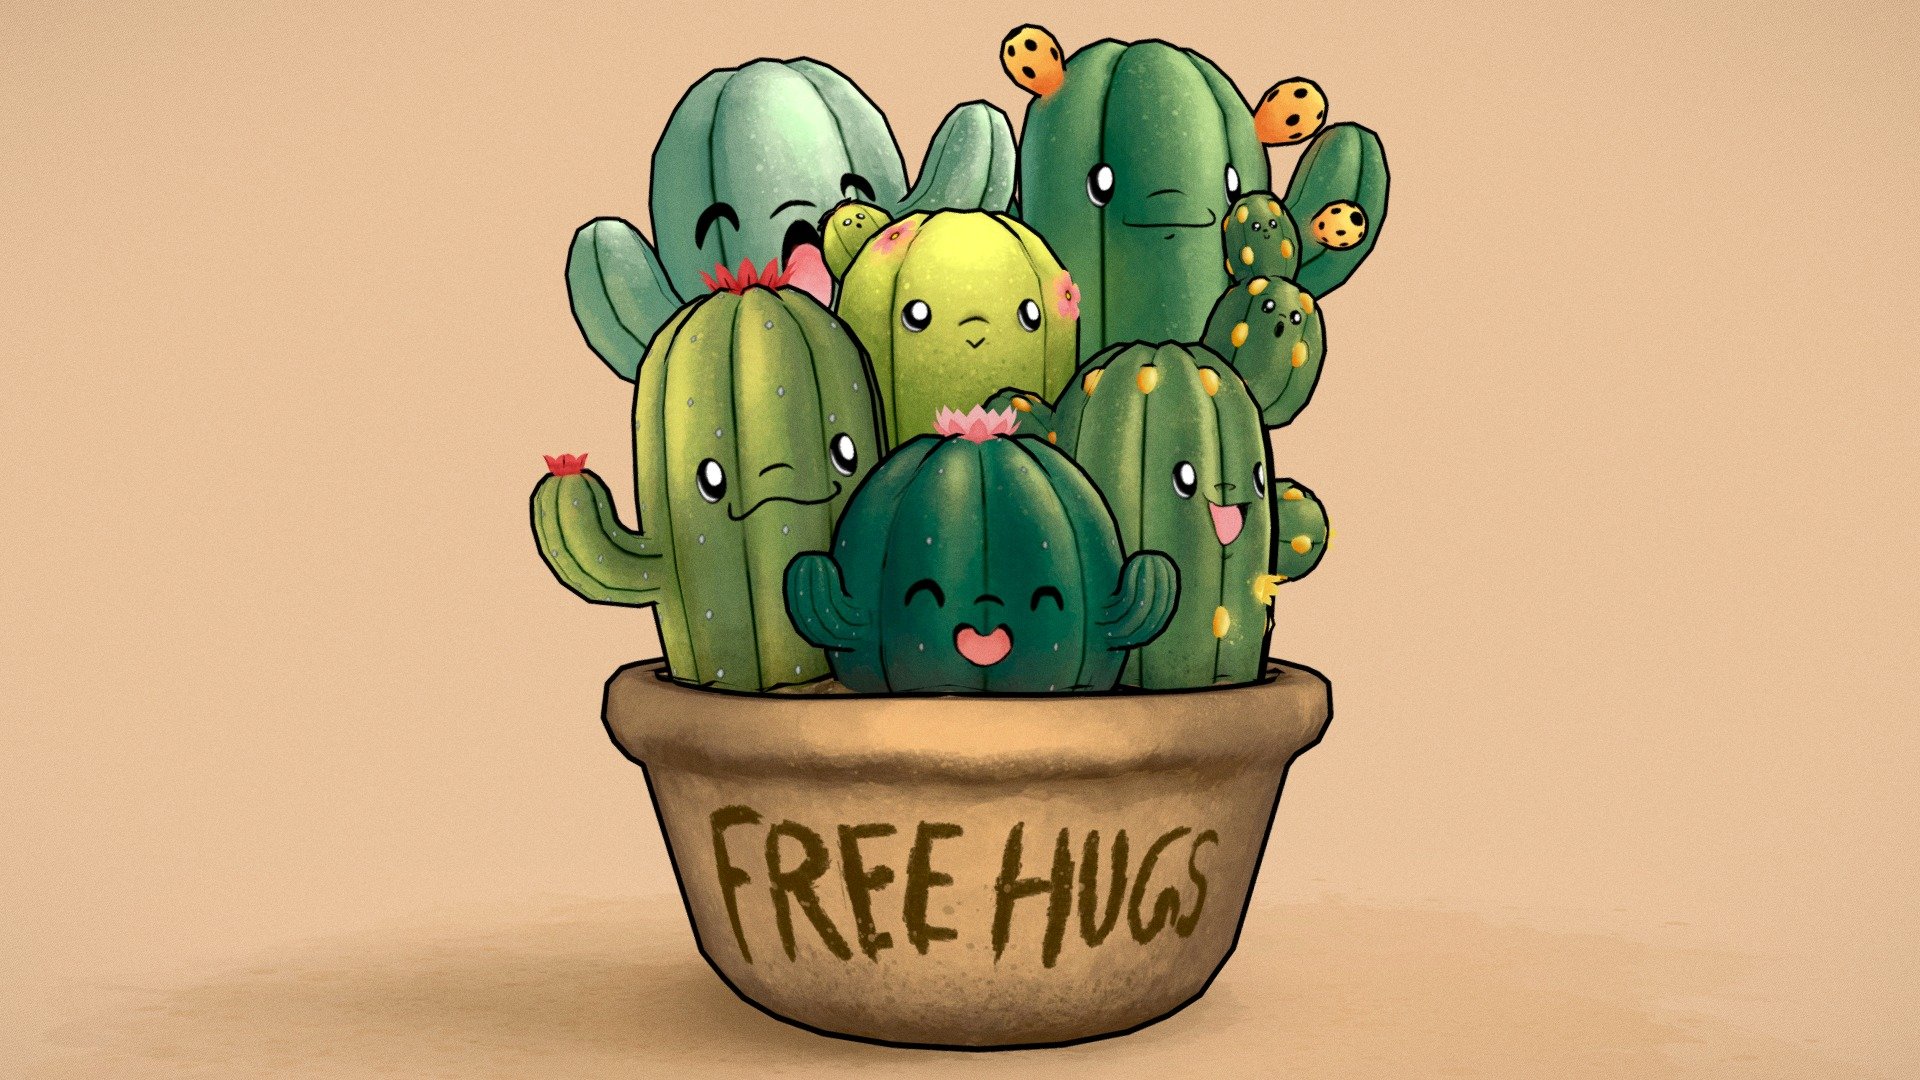 Frist try at handpainted painterly textures using Substance Painter

Based off an illustration by peppefrpep :) - Free Hugs - 3D model by theroznick 3d model